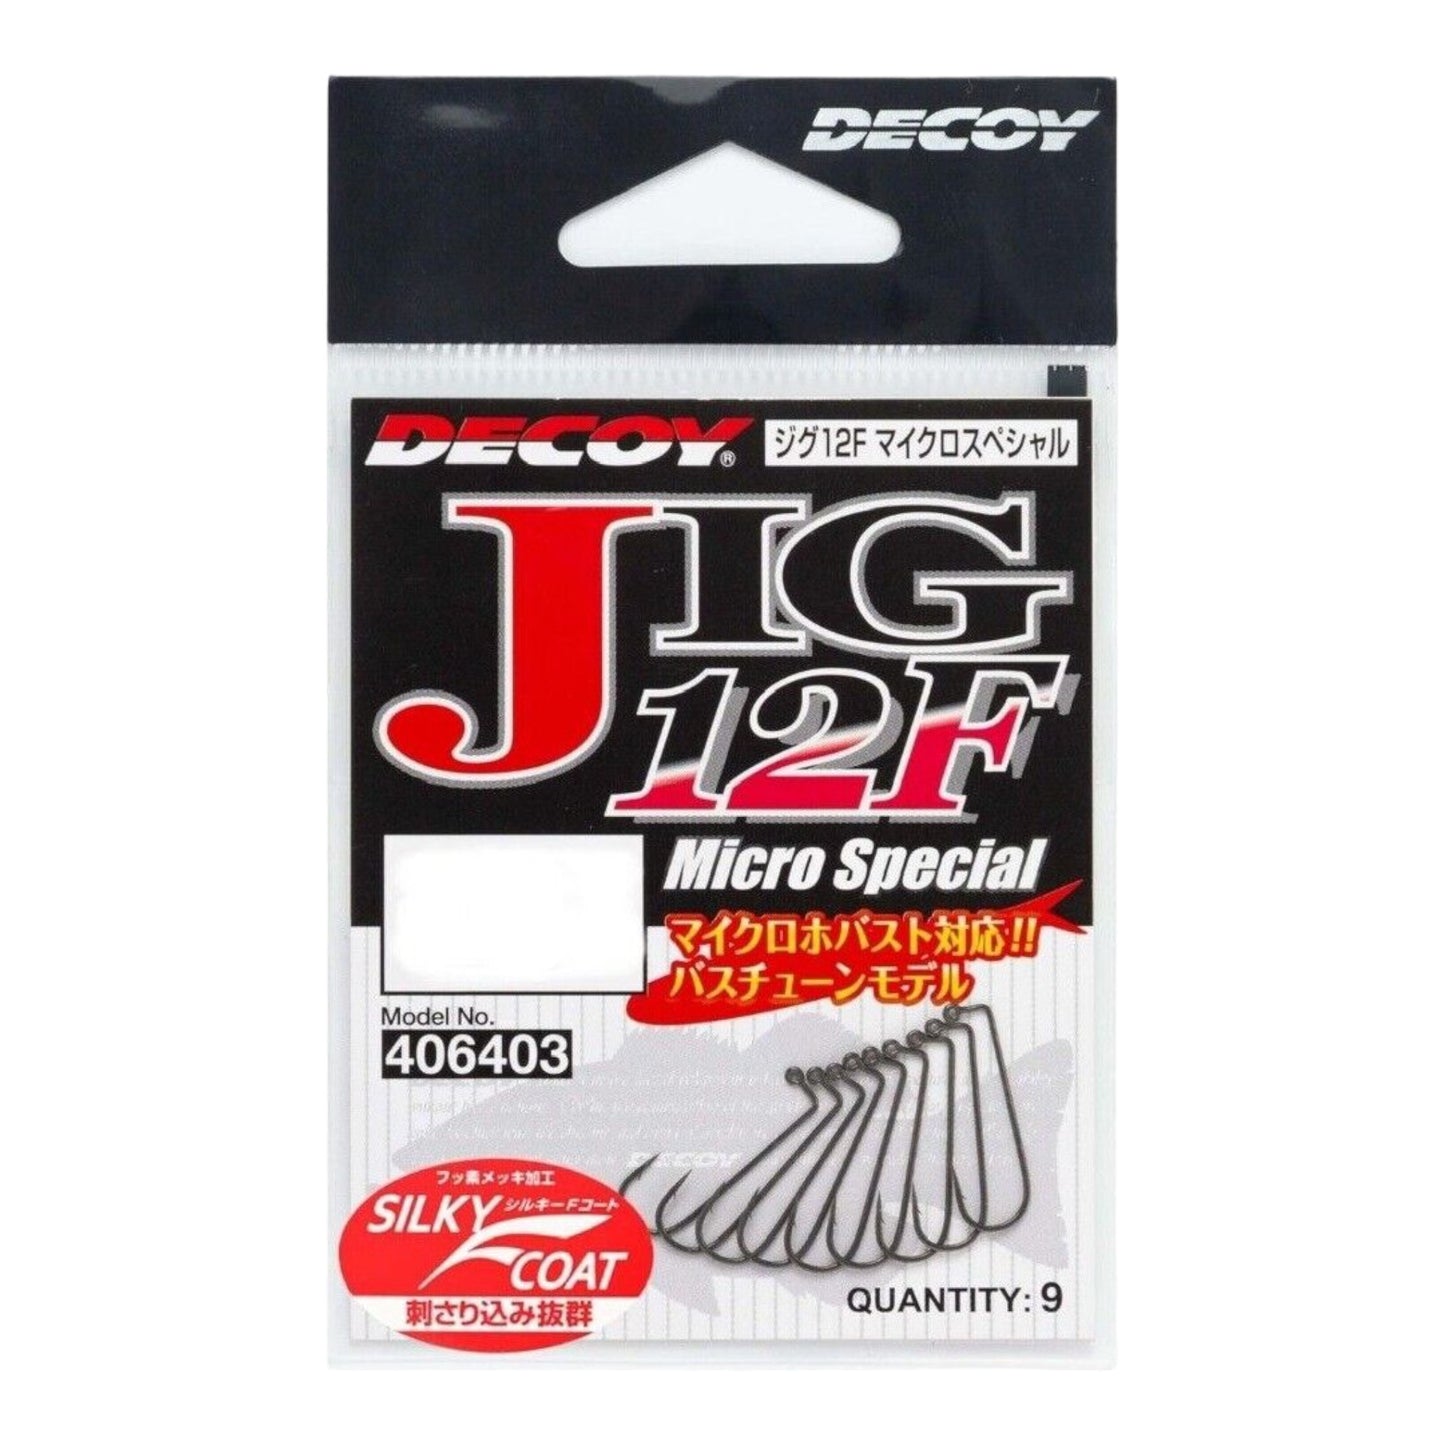 Decoy Jig 12F Micro Special Hover Shot Hook